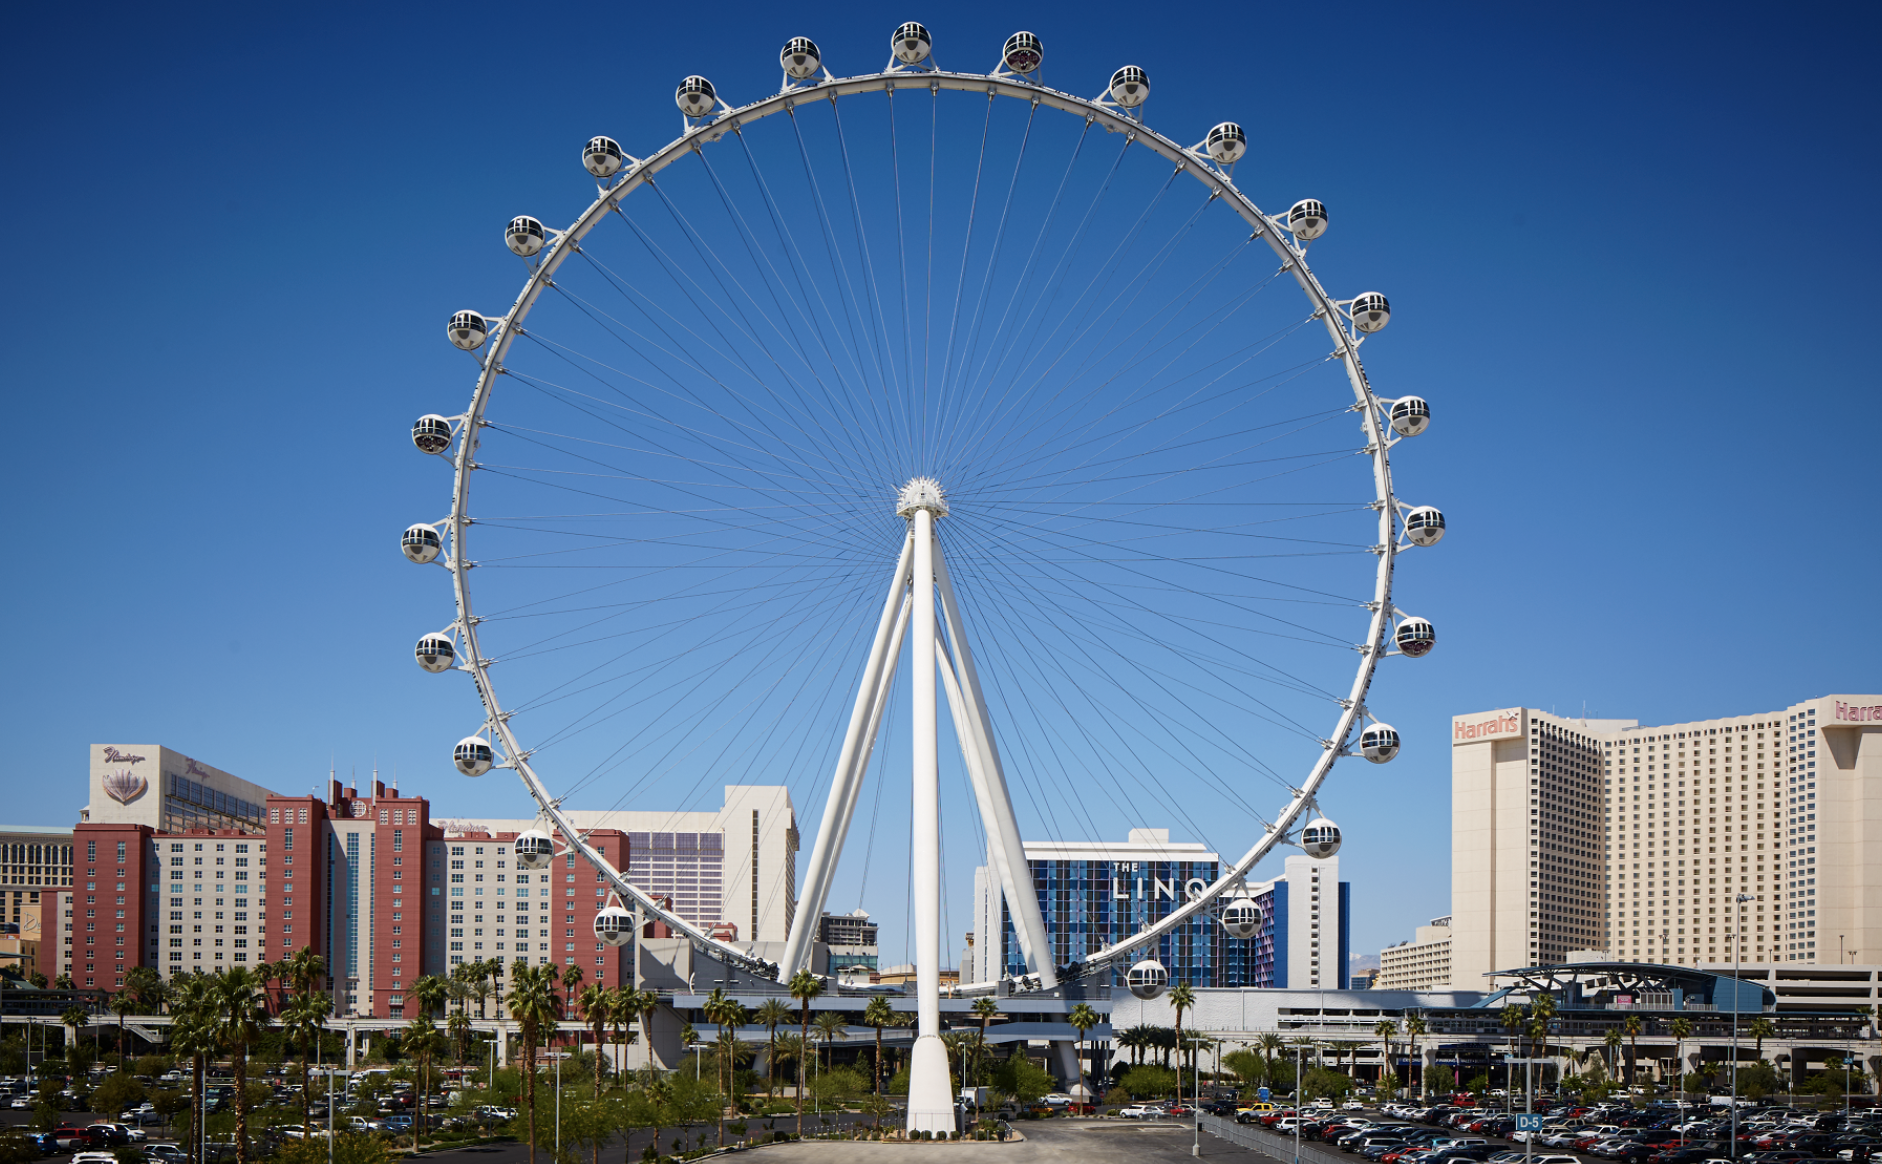 a photo of the high roller wheel from afar